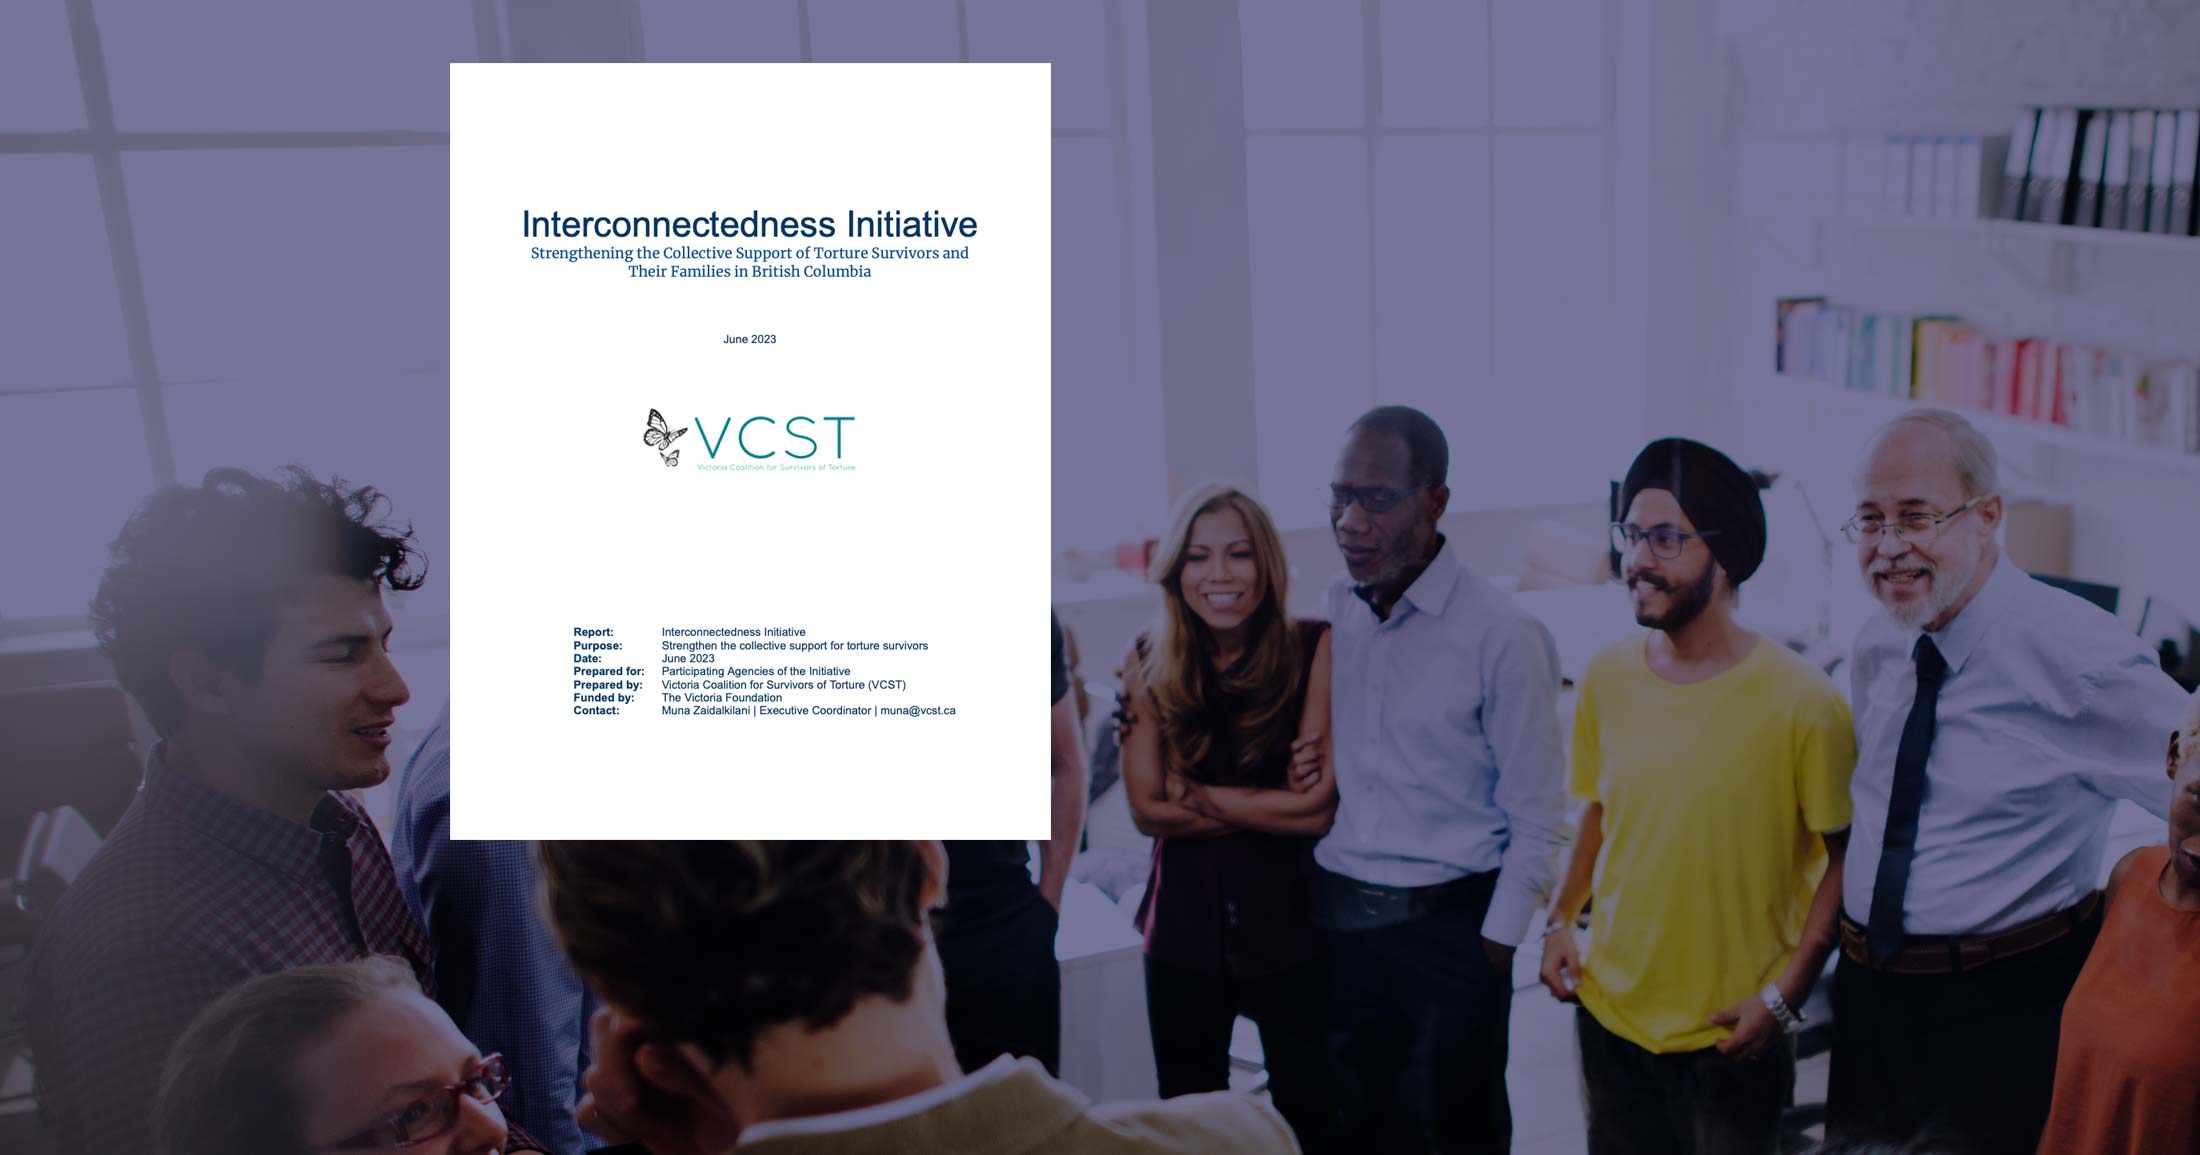 Report cover of the Interconnectedness Initiative floats over top of a group of people in a room.